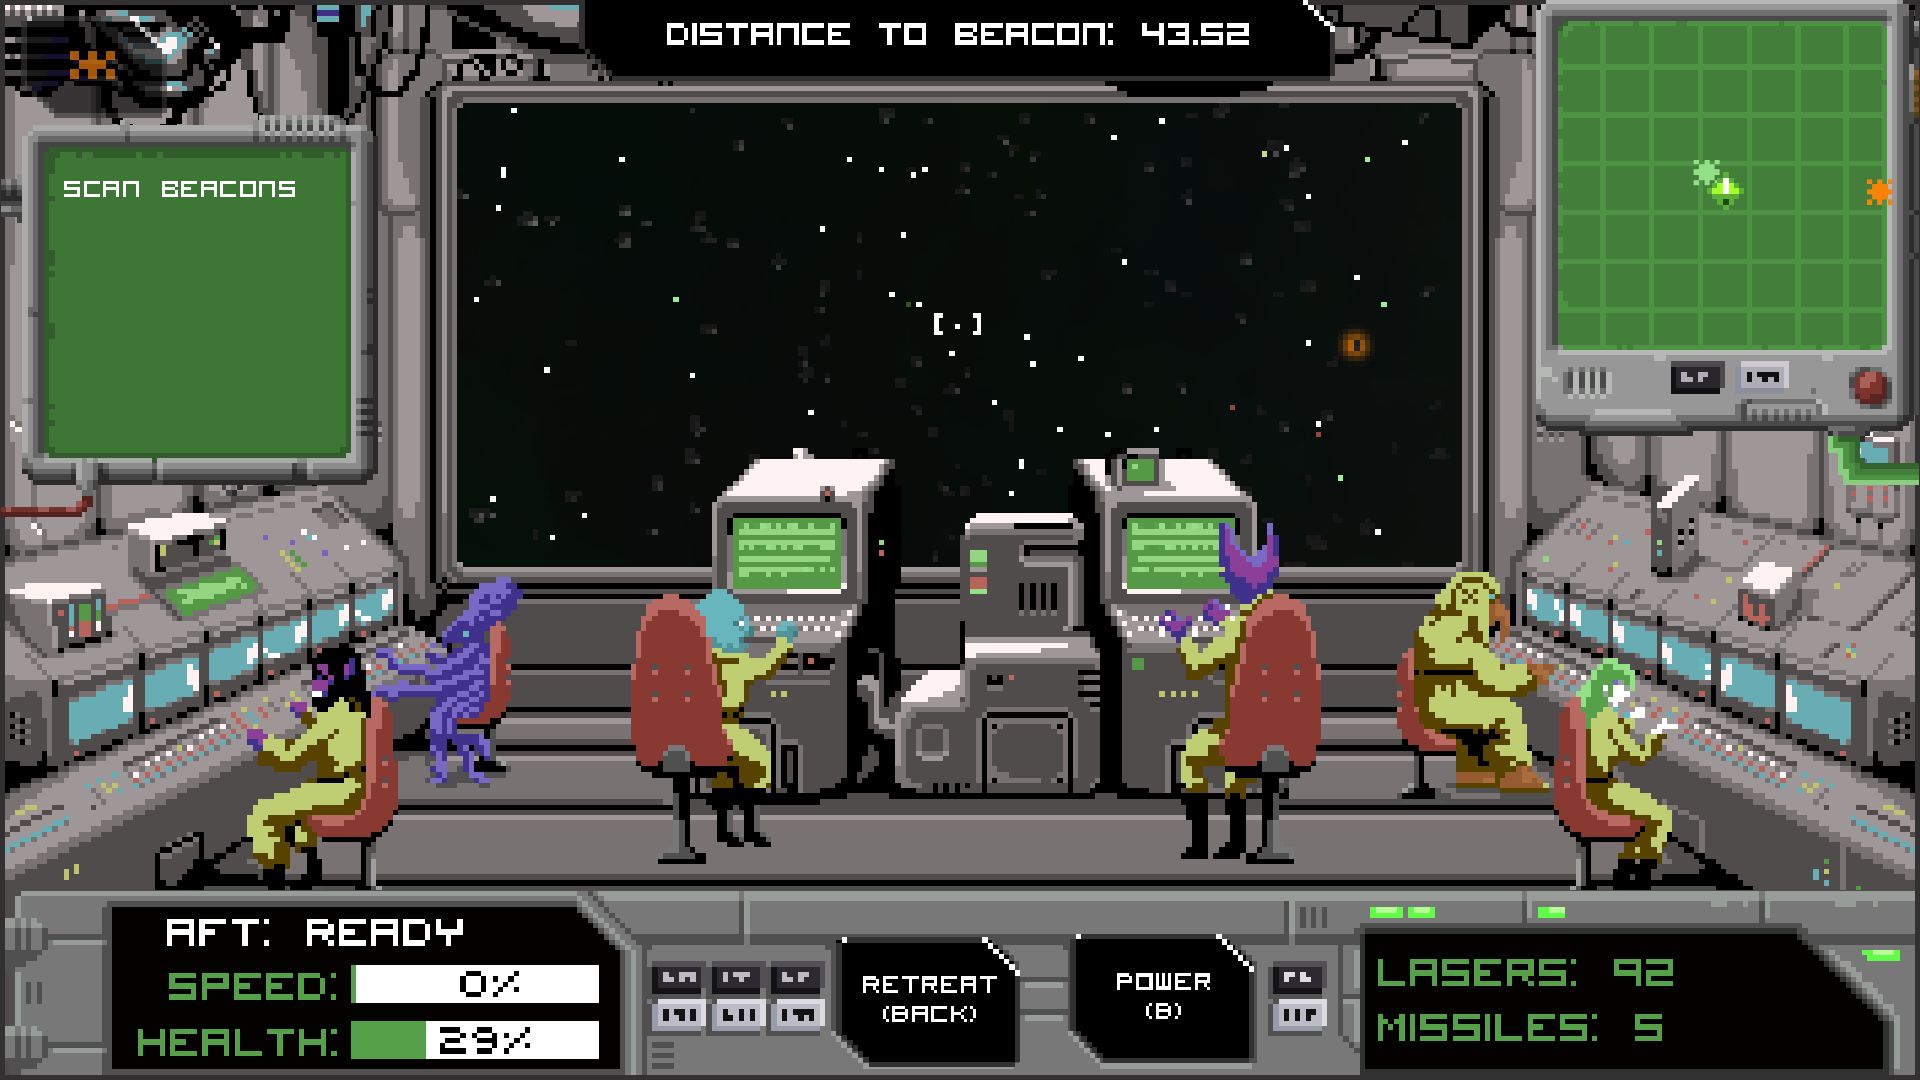 Hyperspace Delivery Service screenshot 1